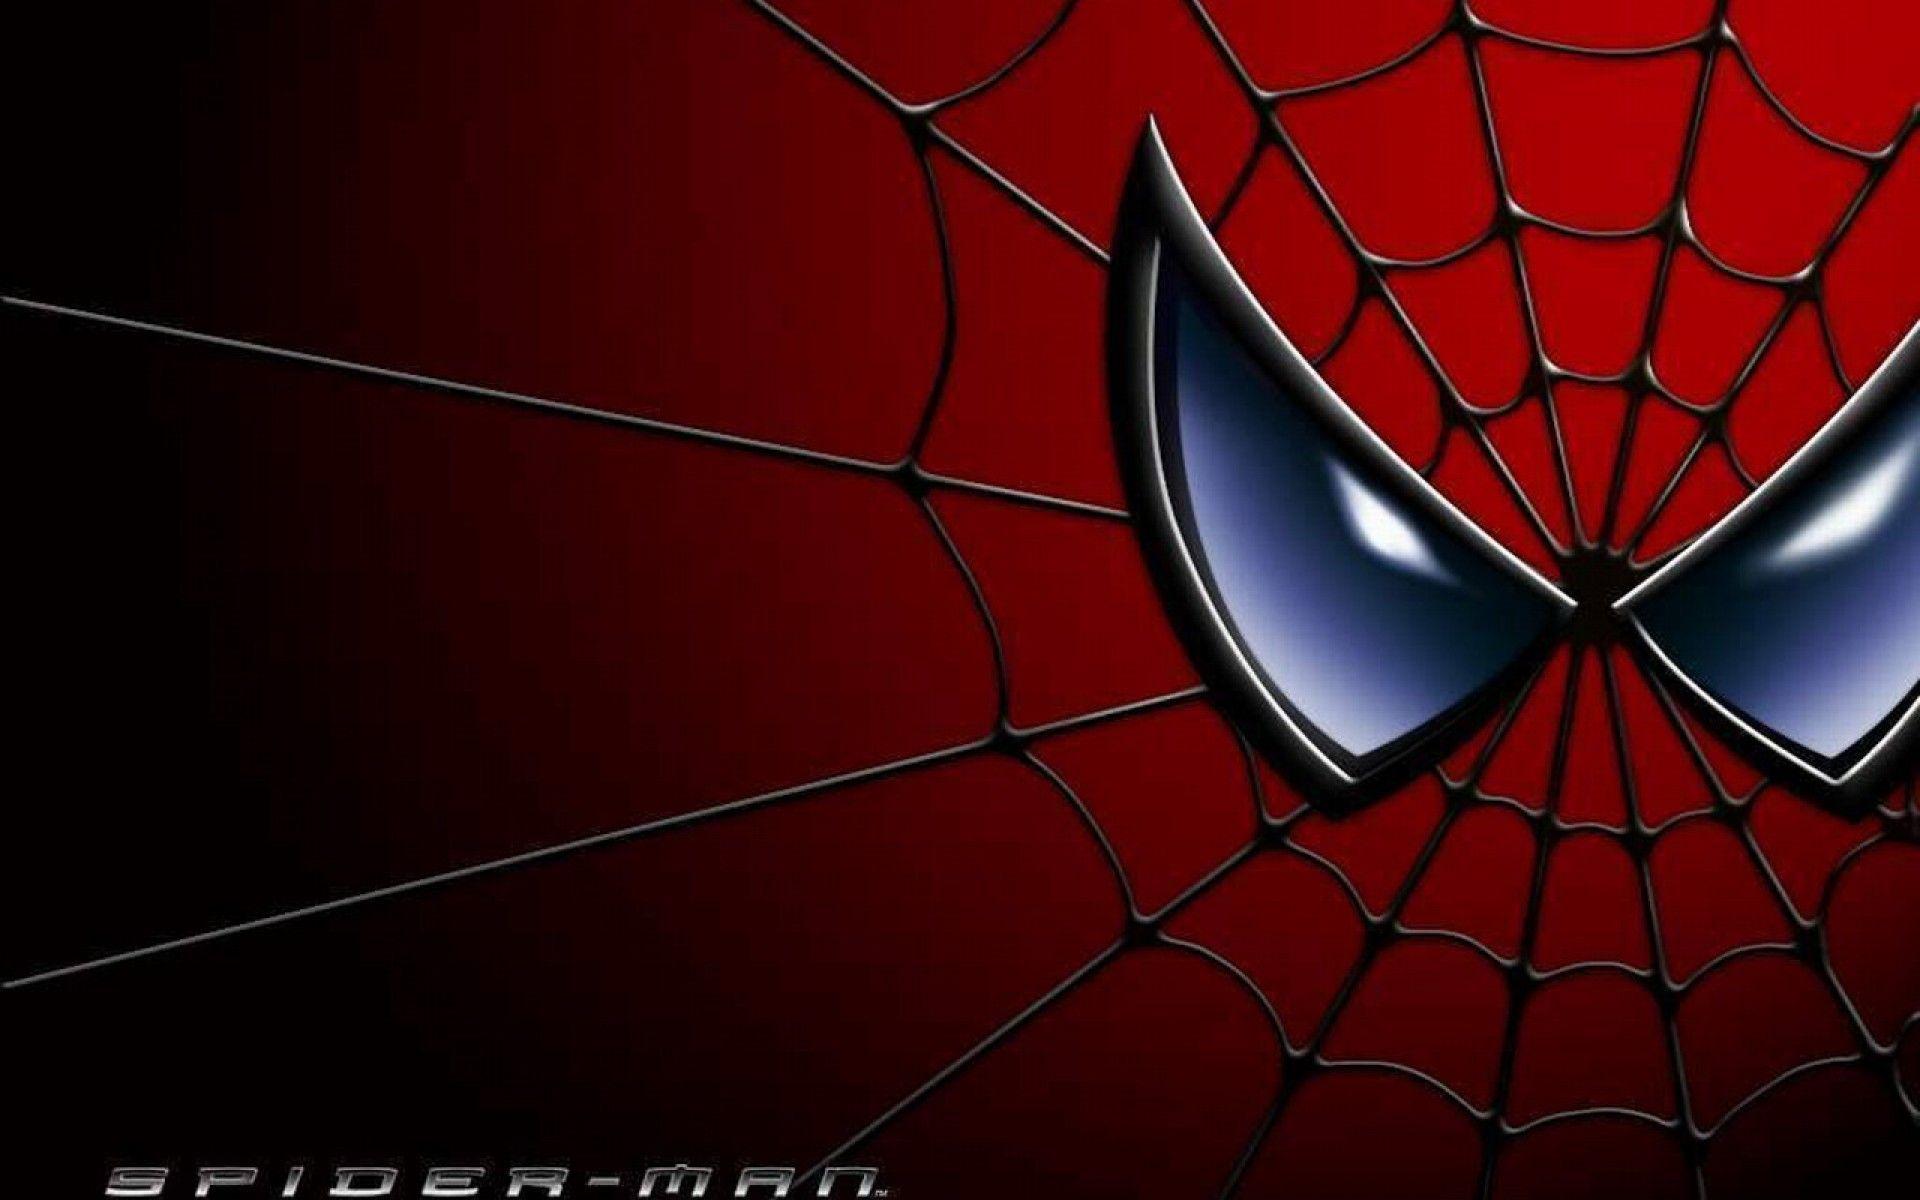 Wallpaper.wiki Cool Spiderman HD Background PIC WPD00874